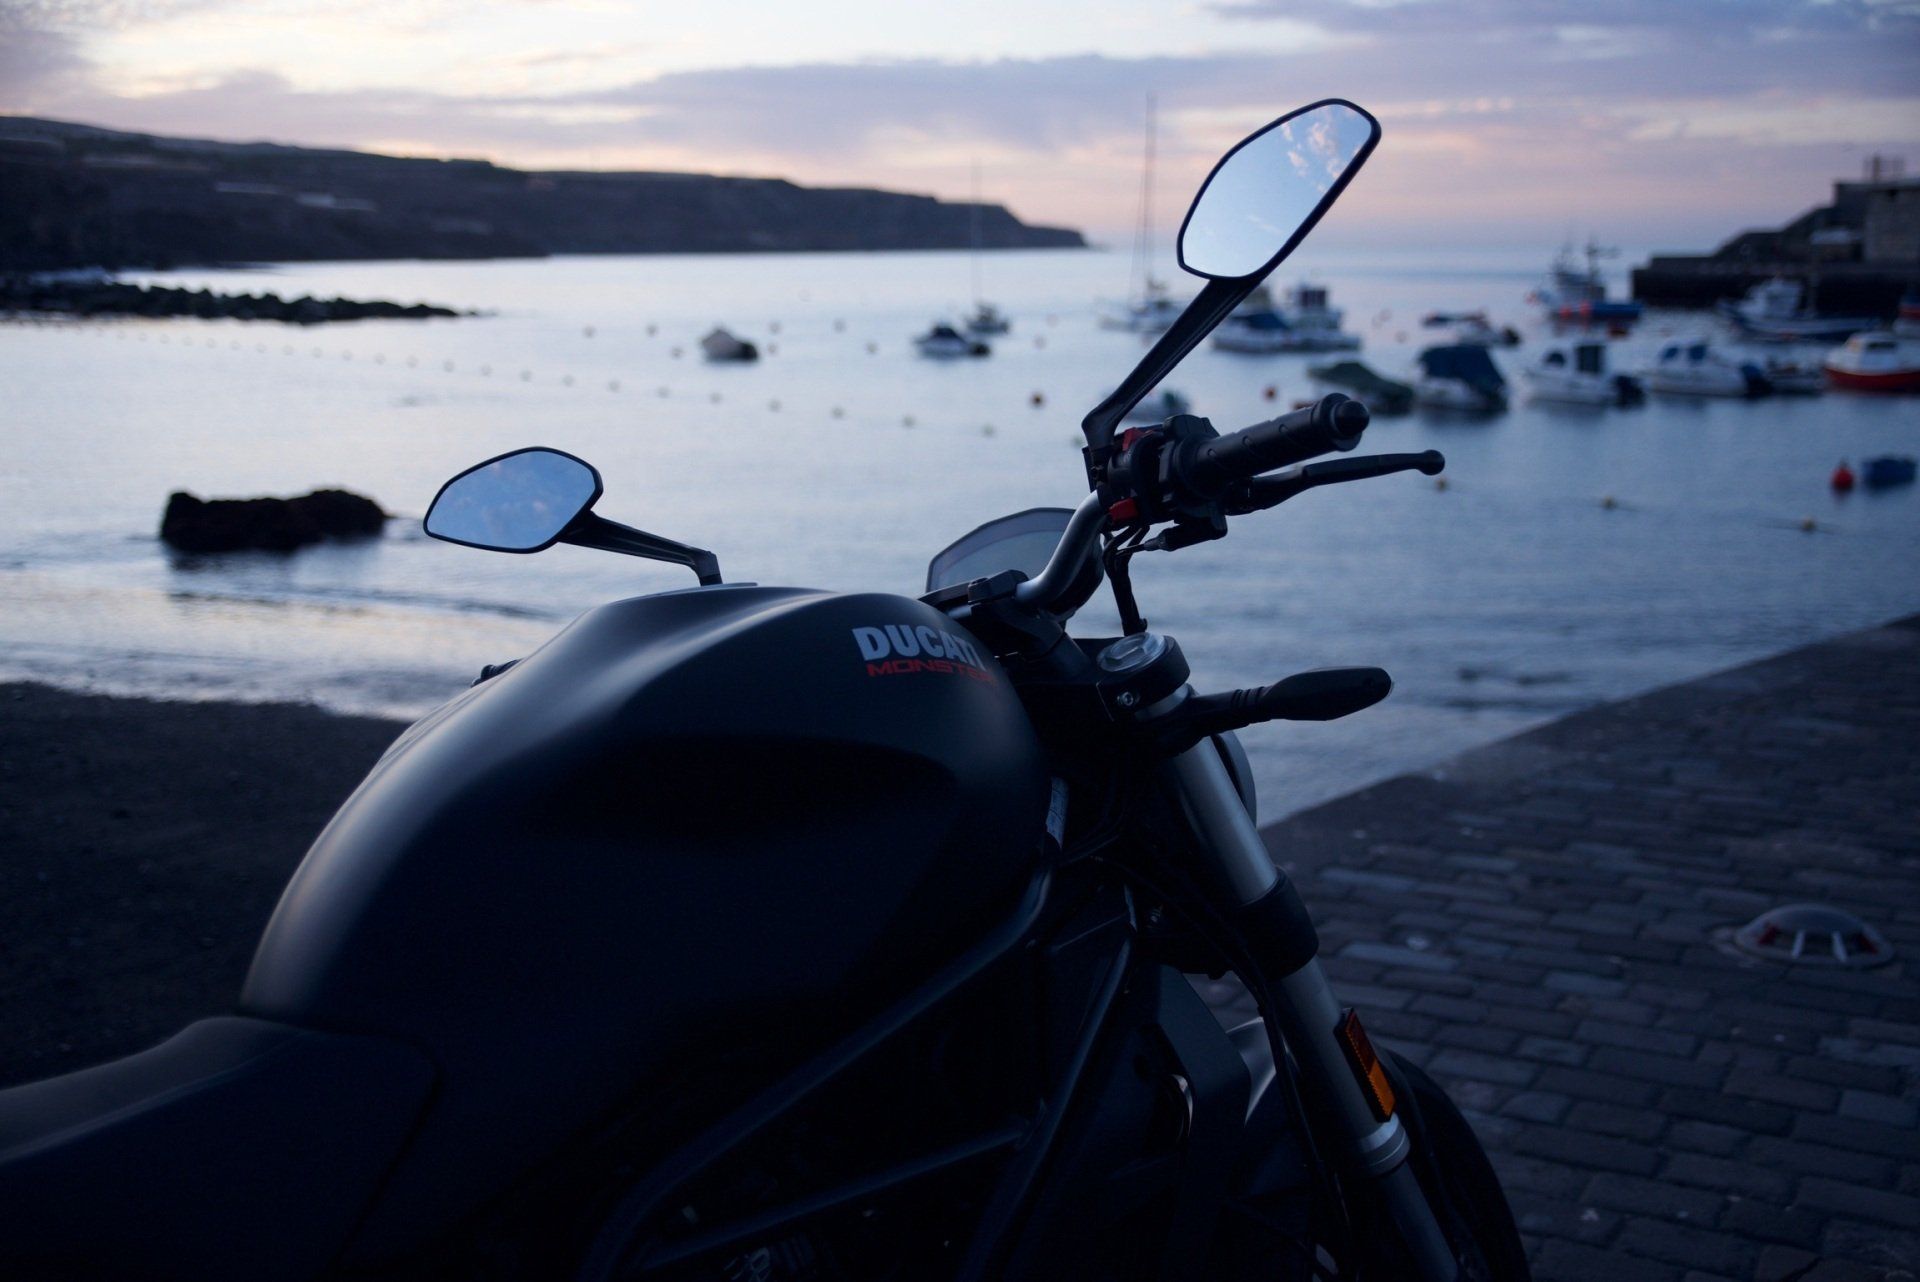 A motorcycle is parked on the side of the road near the water